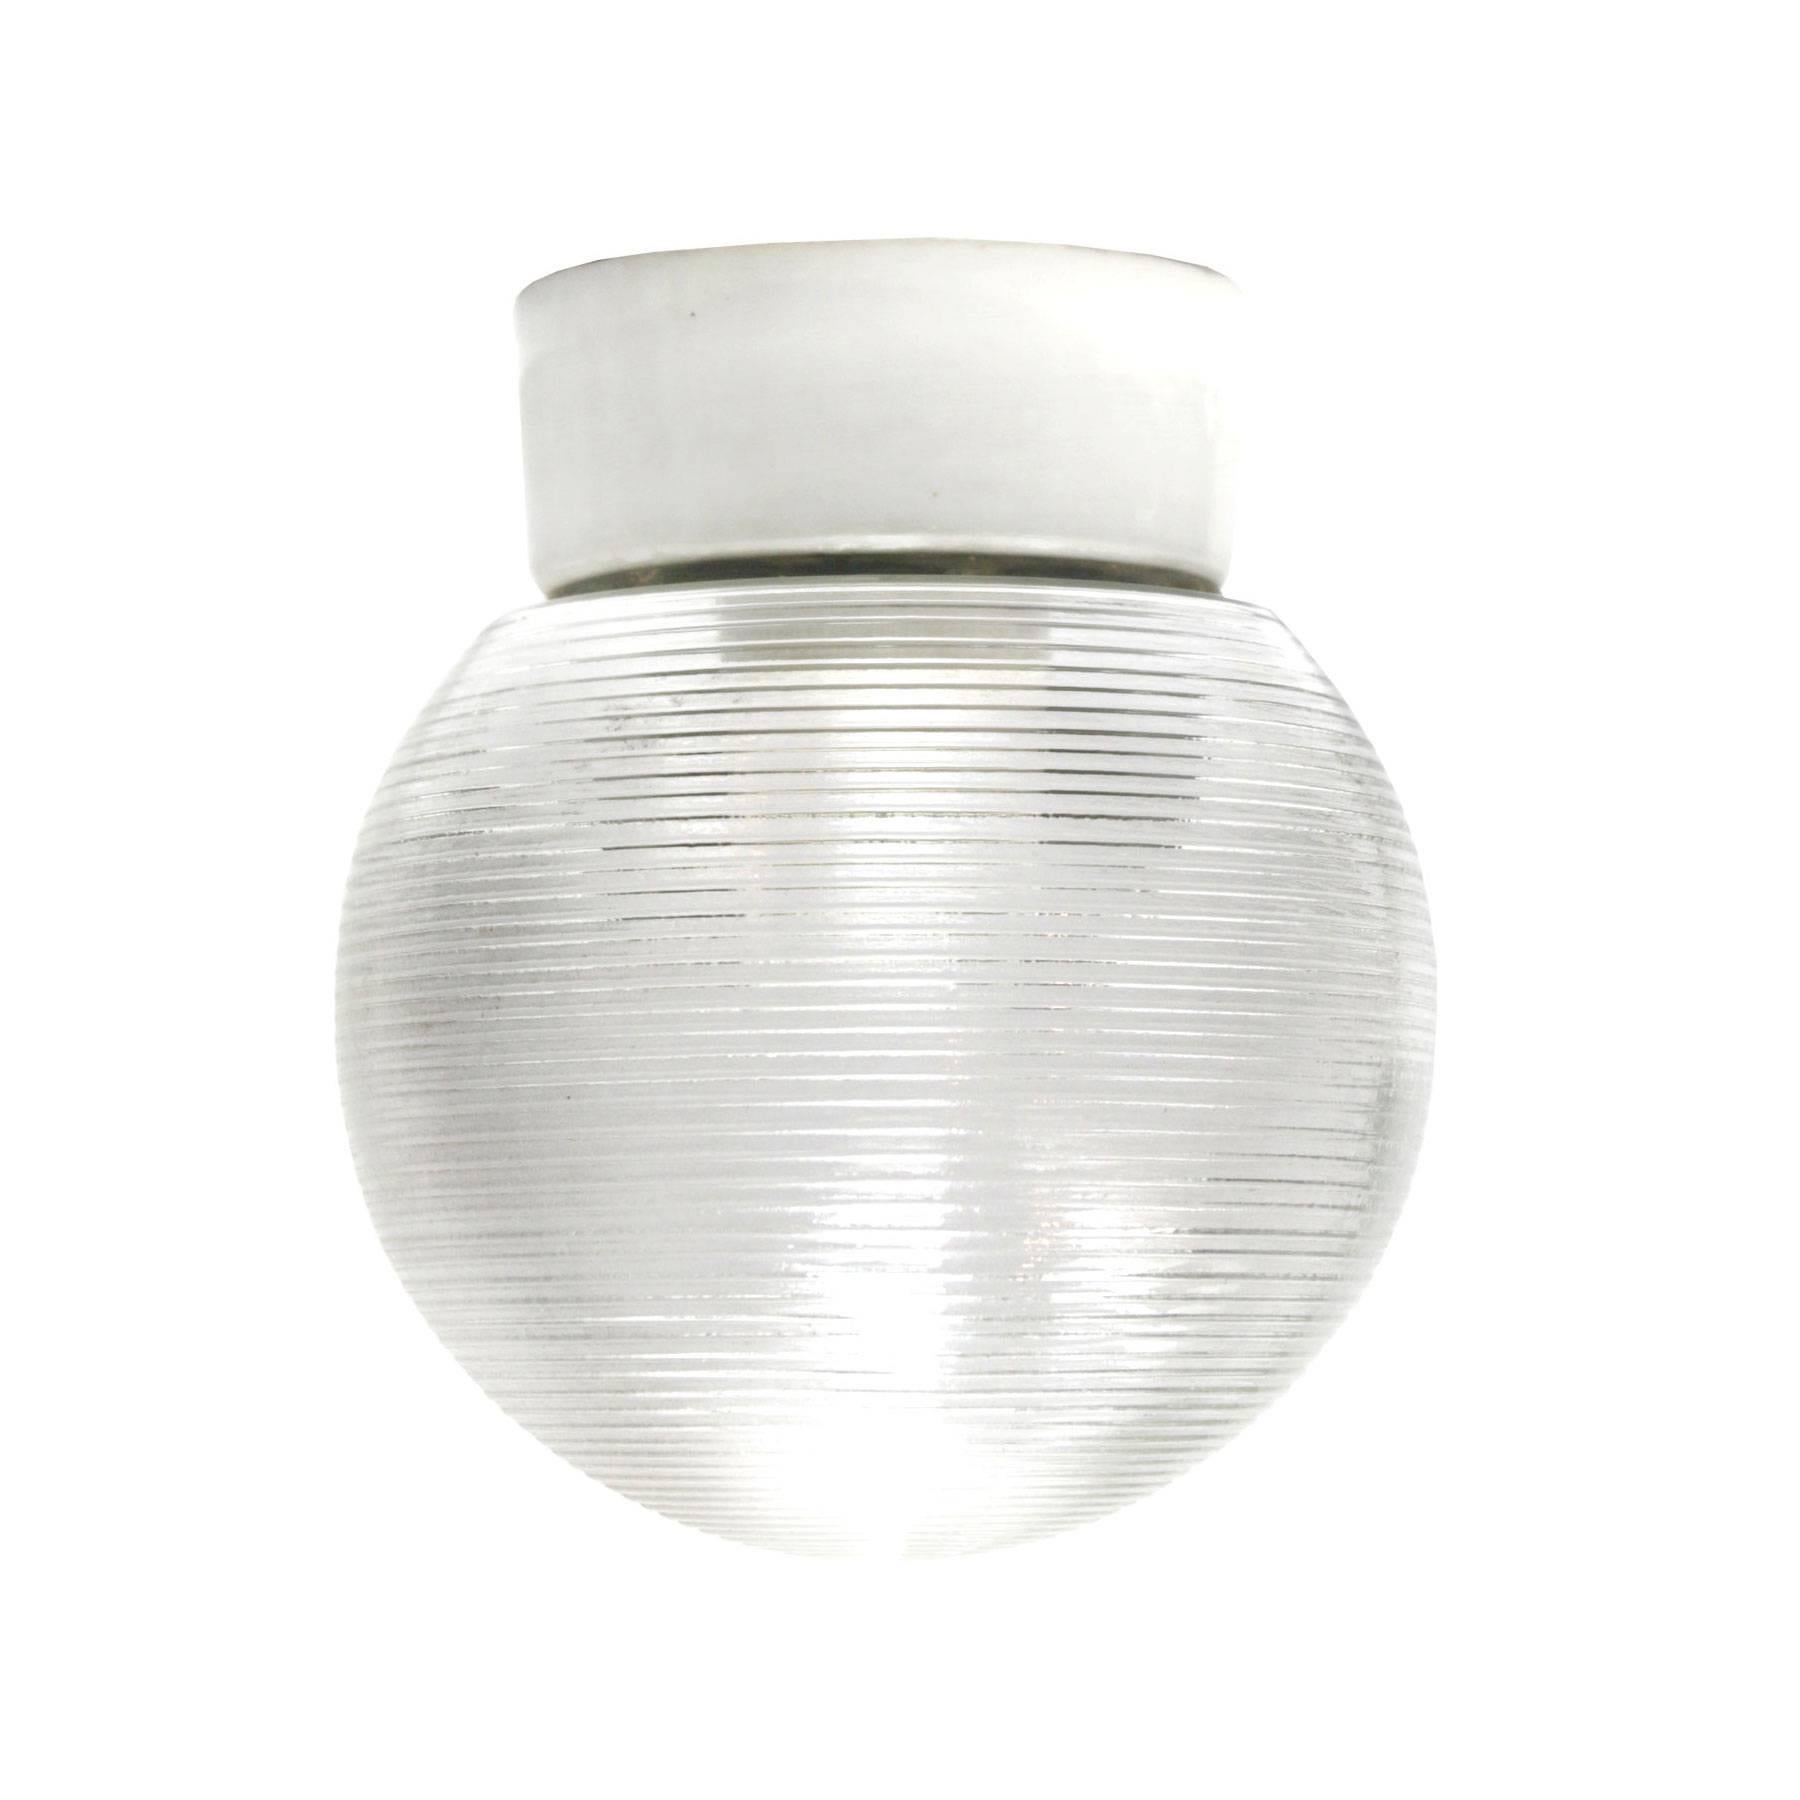 Industrial ceiling lamp. White porcelain. Striped glass.
Two conductors. No ground.

Weight: 0.9 kg / 2 lb

Priced per individual item. All lamps have been made suitable by international standards for incandescent light bulbs, energy-efficient and